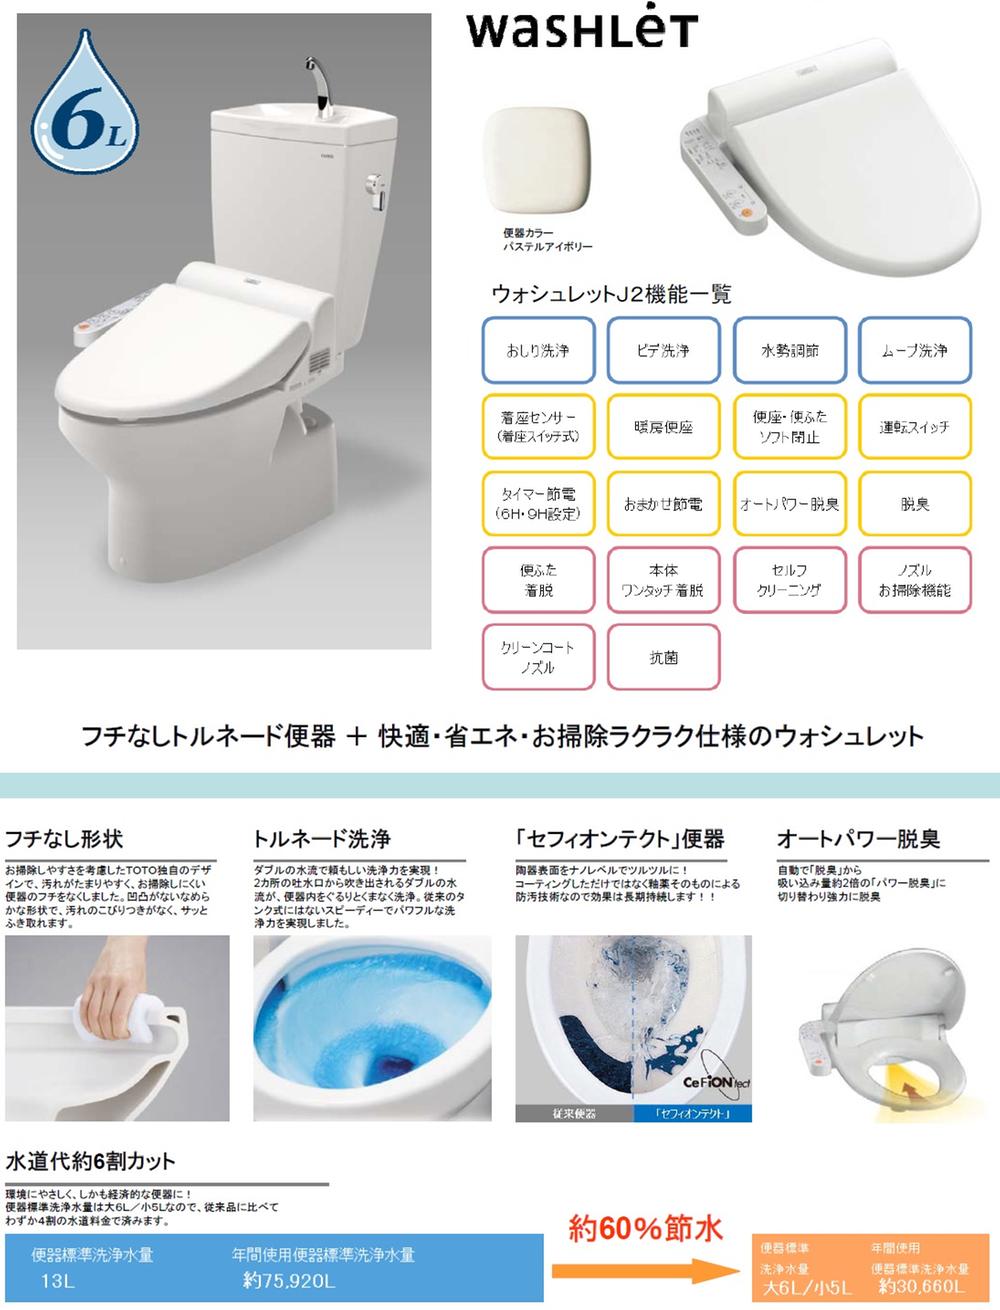 Other Equipment. Water-saving heating with cleaning toilet seat toilet